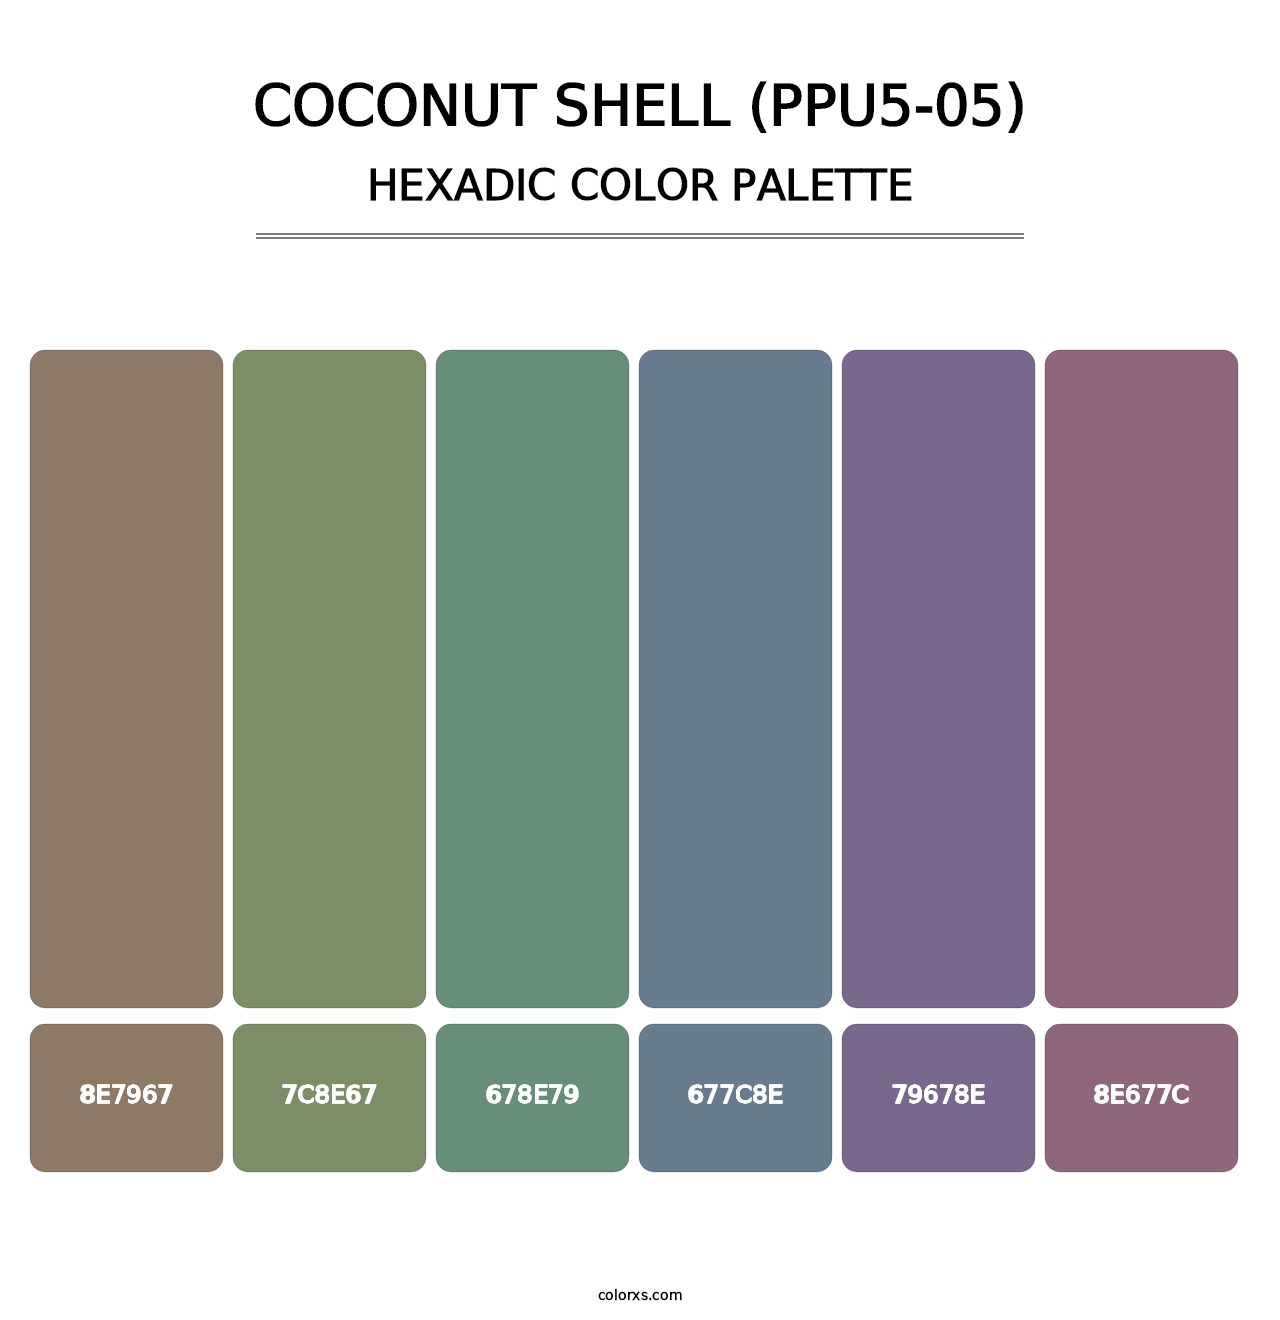 Coconut Shell (PPU5-05) - Hexadic Color Palette